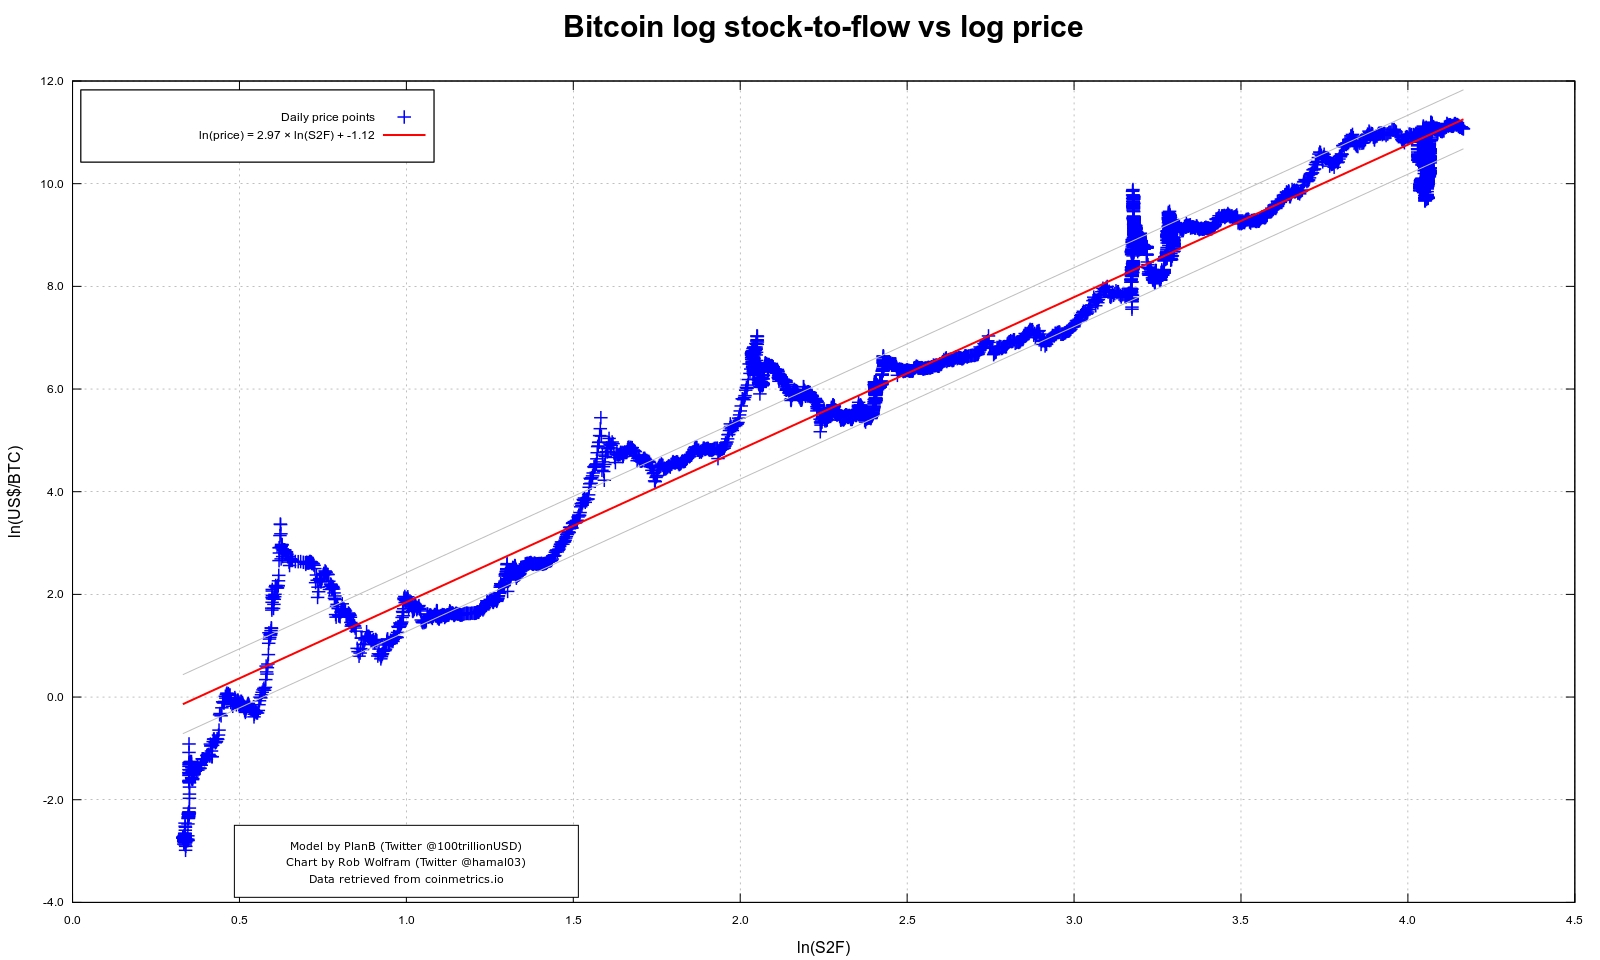 Bitcoin Stock-to-Flow Price Ratio Is Echoing Early - CoinDesk